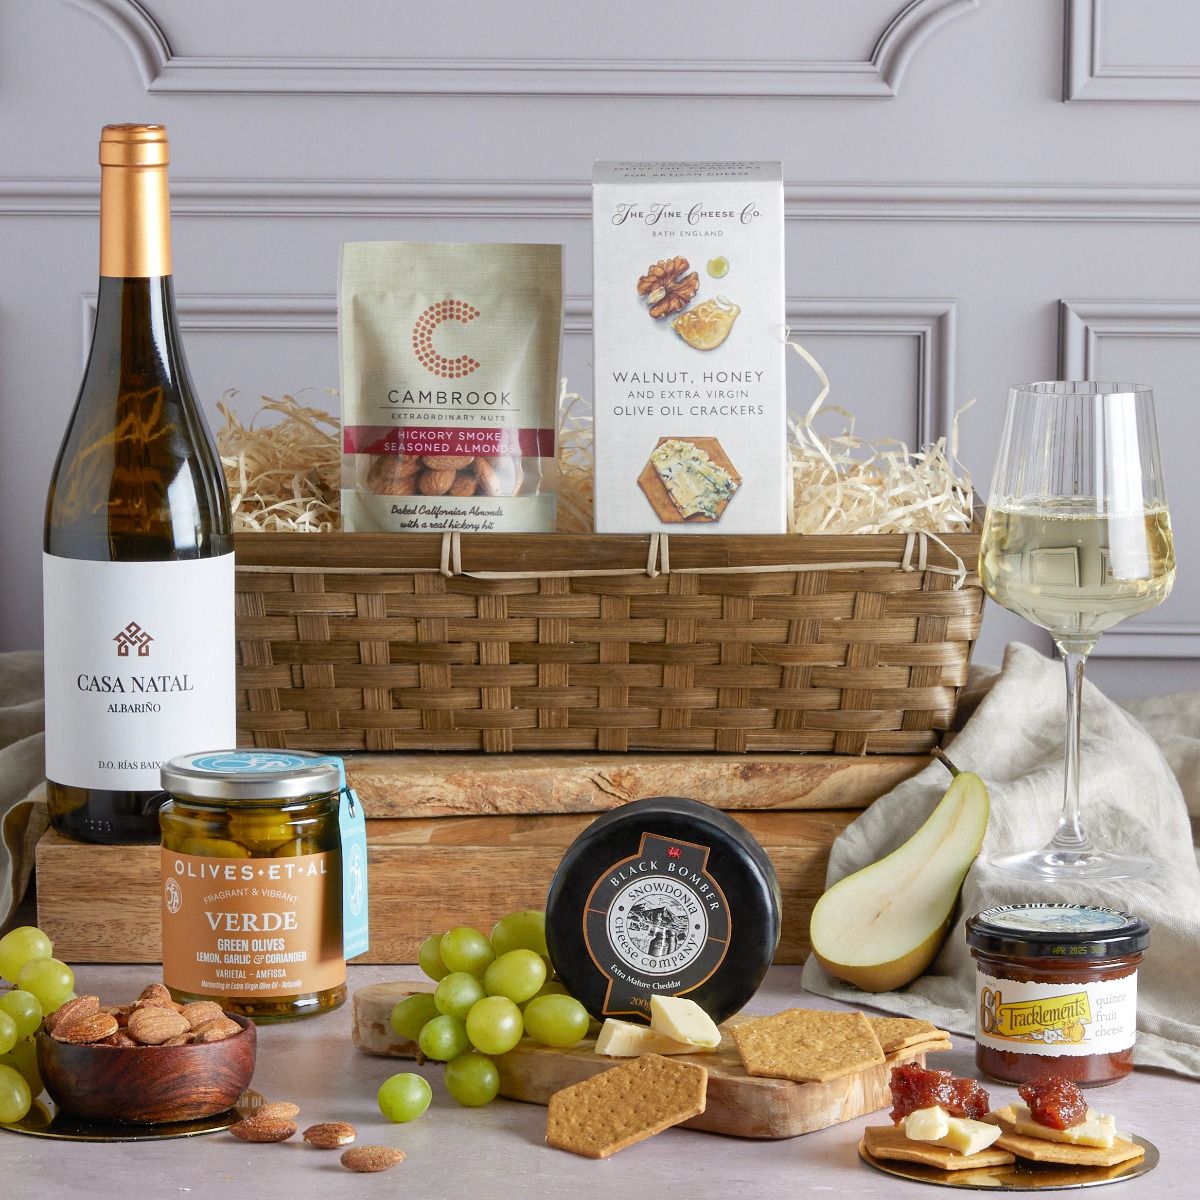  Luxury White Wine, Cheese & Quince Hamper with contents on display as suggested Father's Day Wine Gift